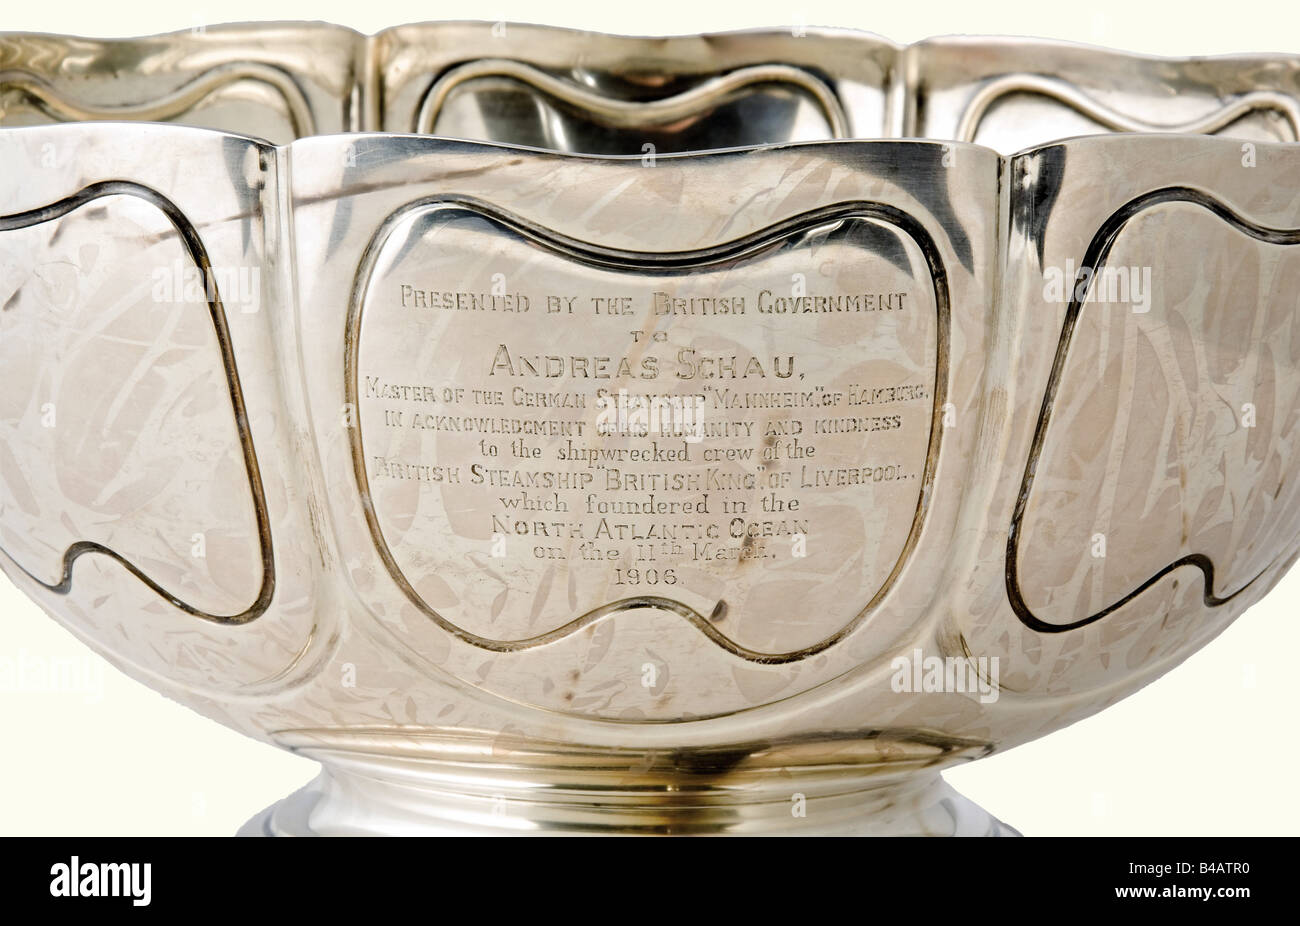 Andreas Schau - a large silver dish., A Present of the British government for the rescue of the crew of the sunken steamship 'British King' from Liverpool, which was in distress in the North Atlantic on 11th March 1906. Andreas Schau was the captain of the German steamship 'Mannheim' from Hamburg. In the front the engraved dedication 'Presented by the British Government to - Andreas Schau - Master of the German steamship 'Mannheim' of Hamburg in acknowledgement of humanity and kindness to the shipwrecked crew of the British steamship 'British King' of Liverpool, Stock Photo